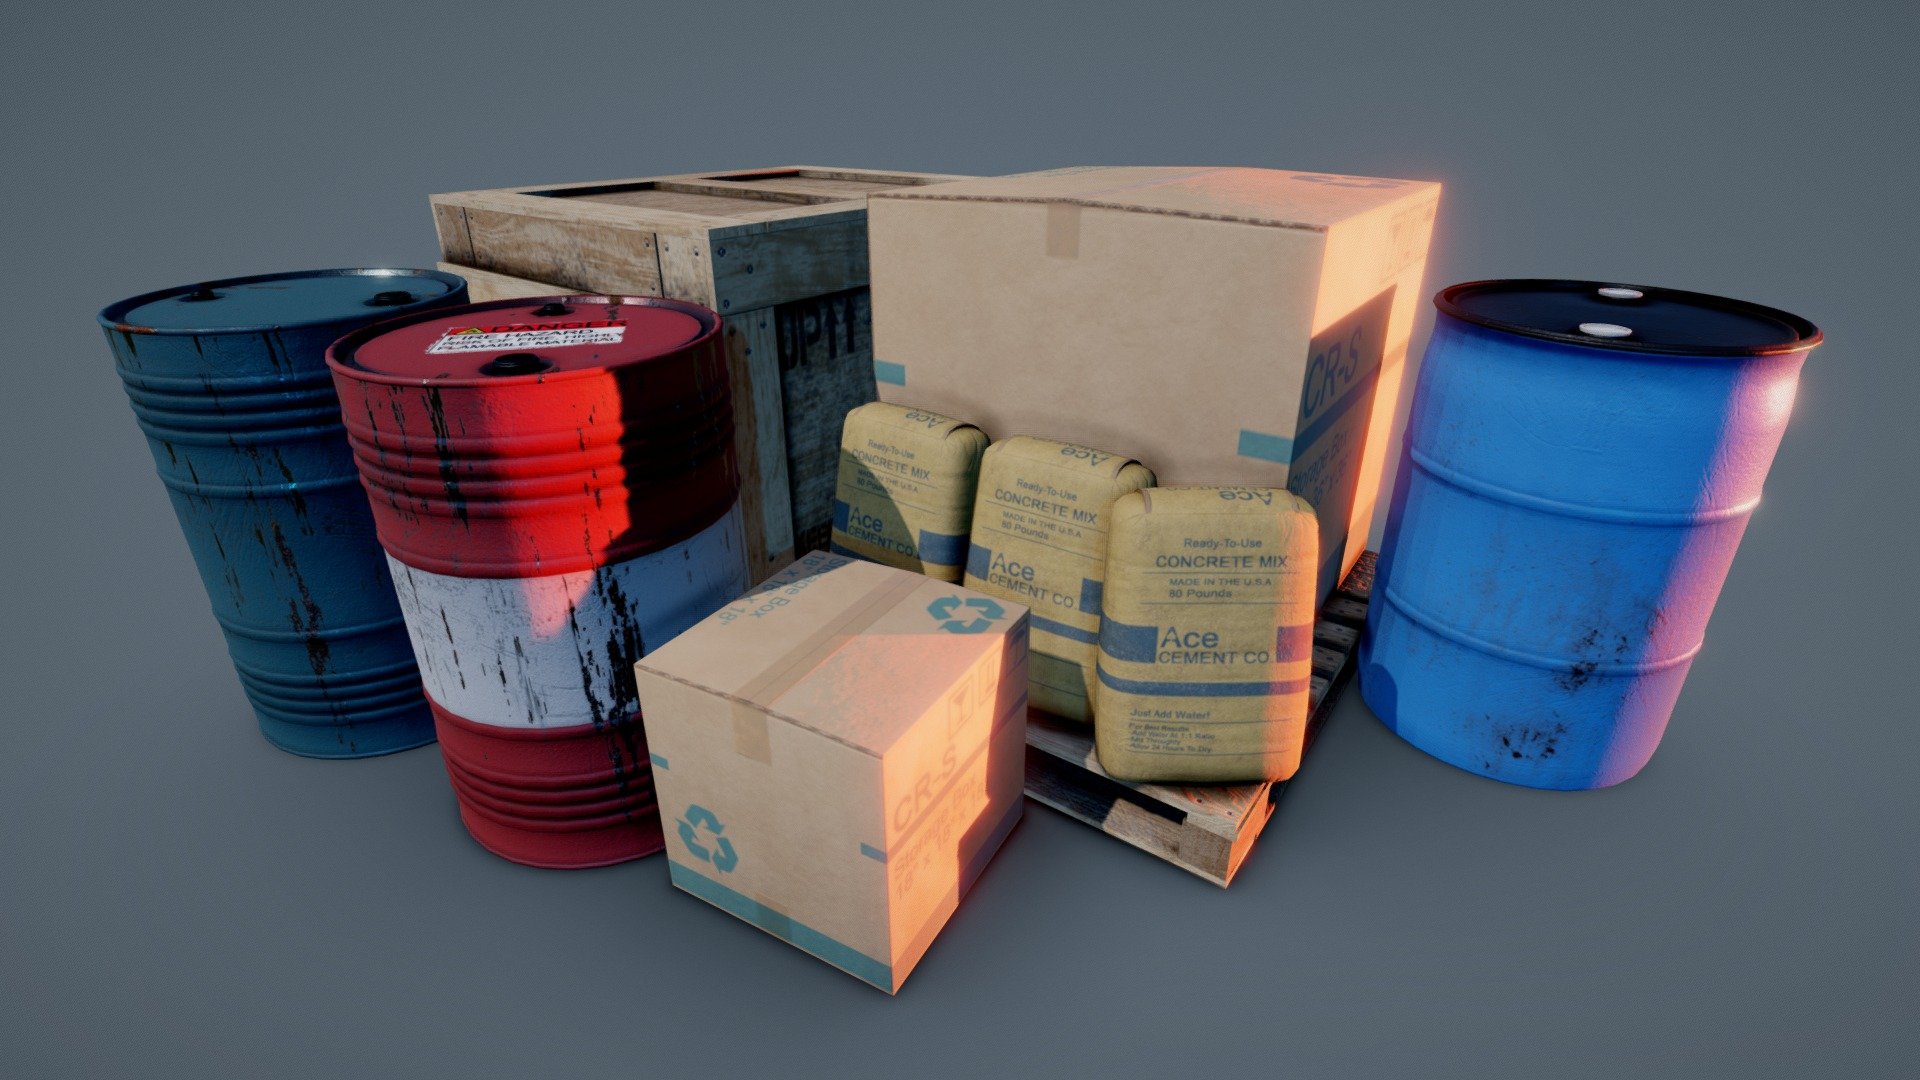 Hey everyone,

This is a high quality set (pack) of Game Ready 3D Assets. Including detailed 3D models and PBR Ready Texture Maps.
When purchasing this model you get access to, not only, the models shown here as well as additional high resolution texture maps (2048X2048) and even height maps for parallex or tessolation displacement.

These Assets Include
-Block Pallet
-Cardboard Boxes (2)
-Concrete Mix
-Oil Drums (2)
-Water Barrel
-Wood Crate
As well as 2K&hellip;
-Color
-Normal
-Roughness
-Metallic
-Ambient Occolusion
-Height
Maps for all Meshes.

Buy purchasing this pack you also support me and my work, allowing me to continue producing high quality Game Ready Assets for fellow creators.

Thanks,
-Chris - Industrial Essentials Asset Pack - Buy Royalty Free 3D model by Chris Sweetwood (@ChrisSweetwood) 3d model